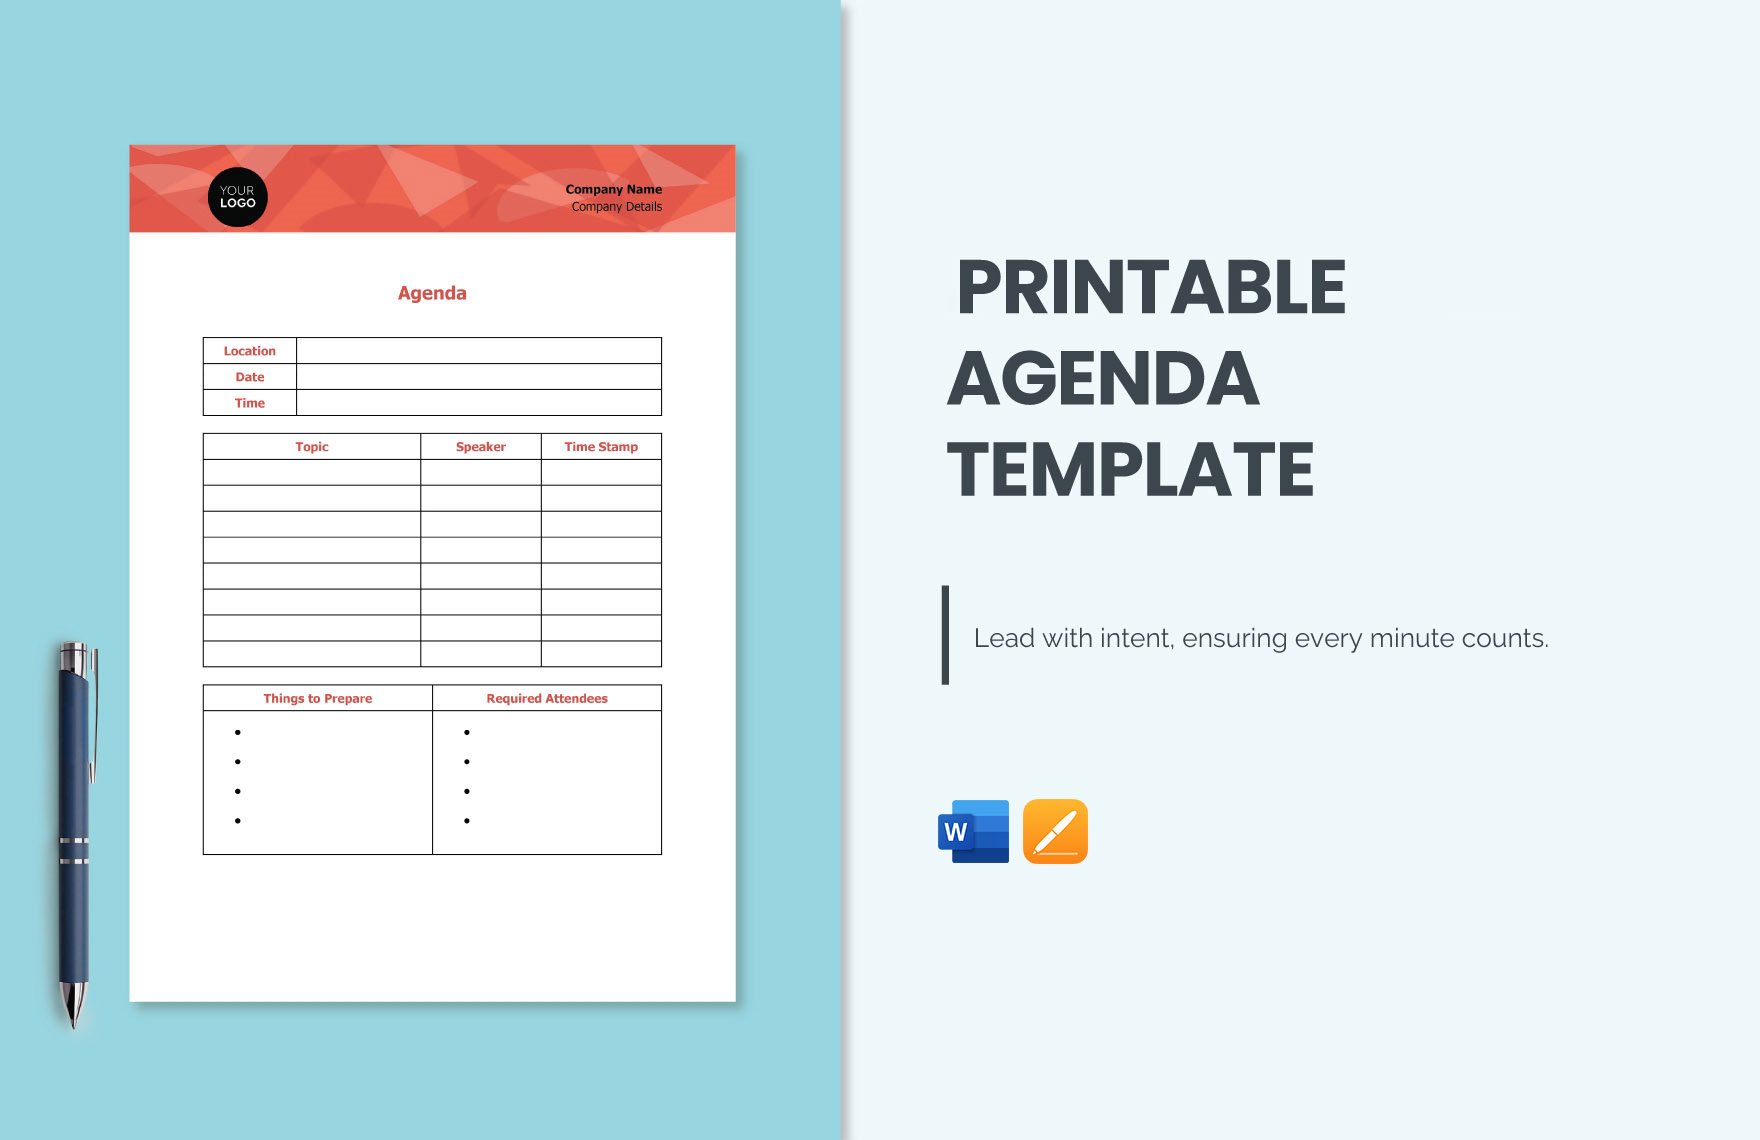 Free Printable Agenda Template in Word, Apple Pages